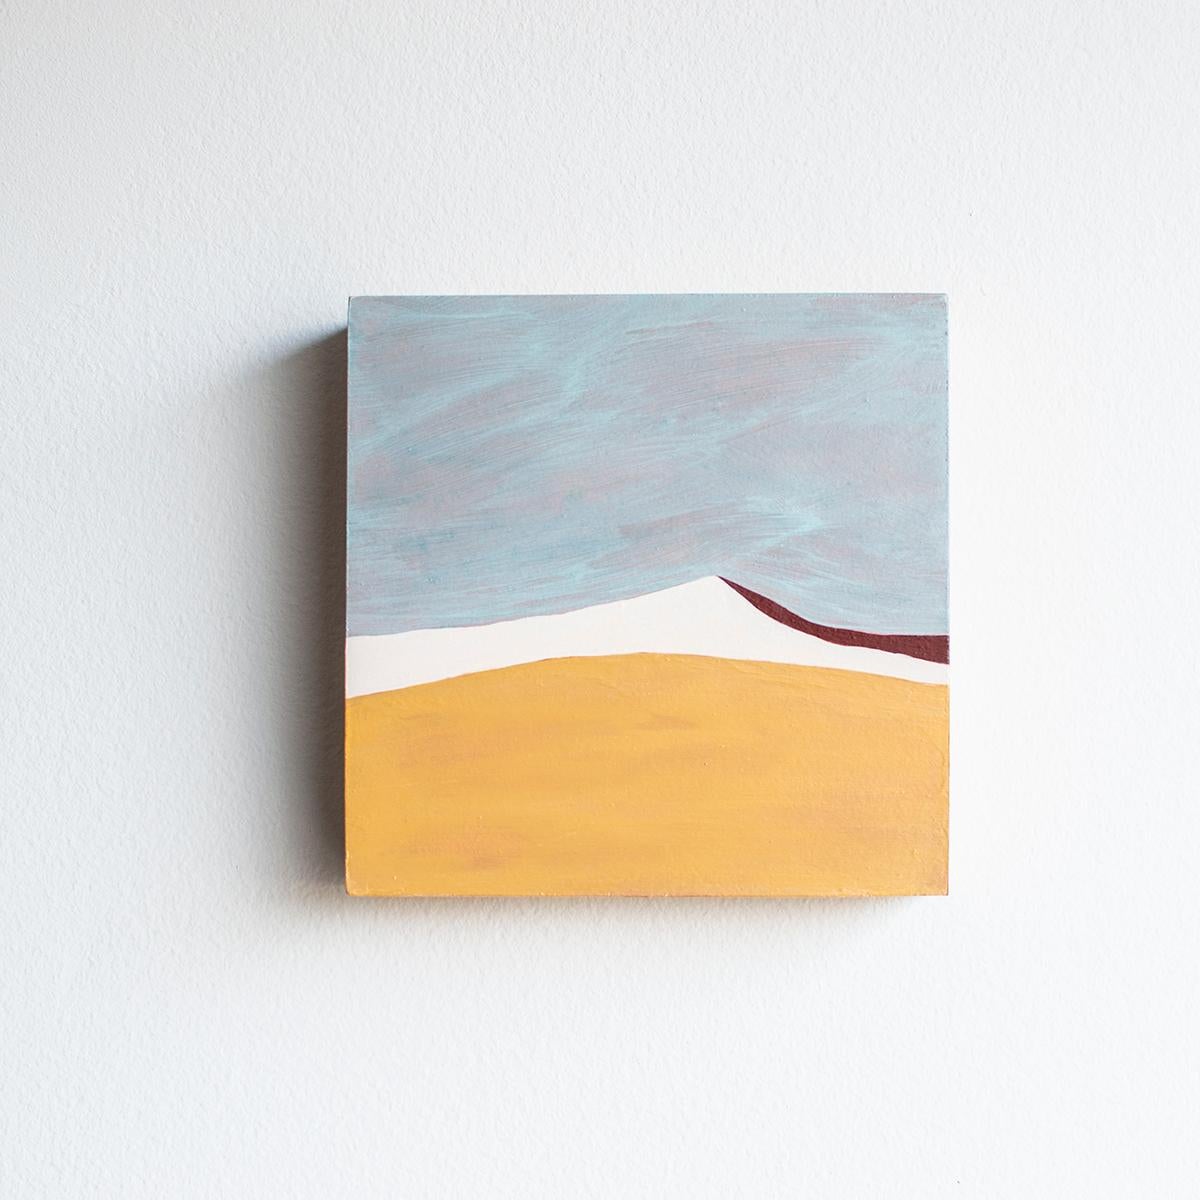 This abstract desert landscape painting by Alina B is made with acrylic paint on board. It features a palette with warm golden yellow and red, contrasted by white and light blue. The light blue sky has a warm undertone, which ties into the